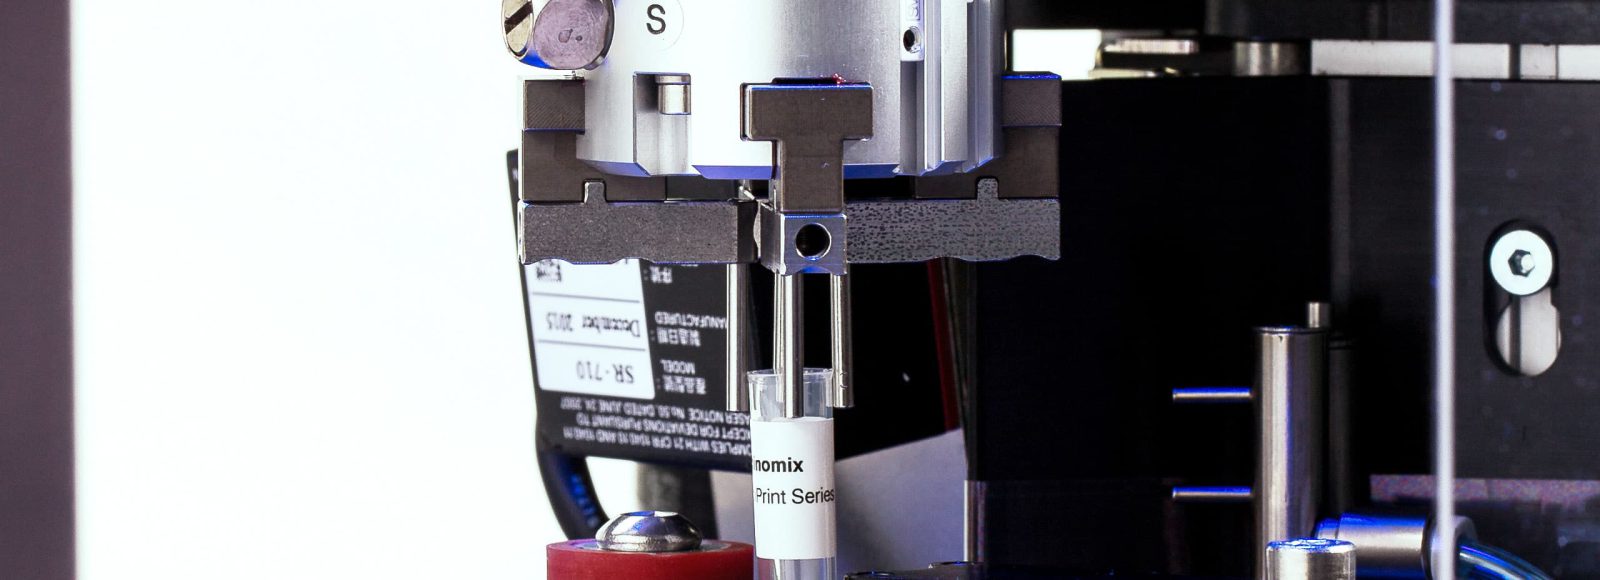 A Miconic tube being held by the gripper finger to be labeled by a Scinomix labeler